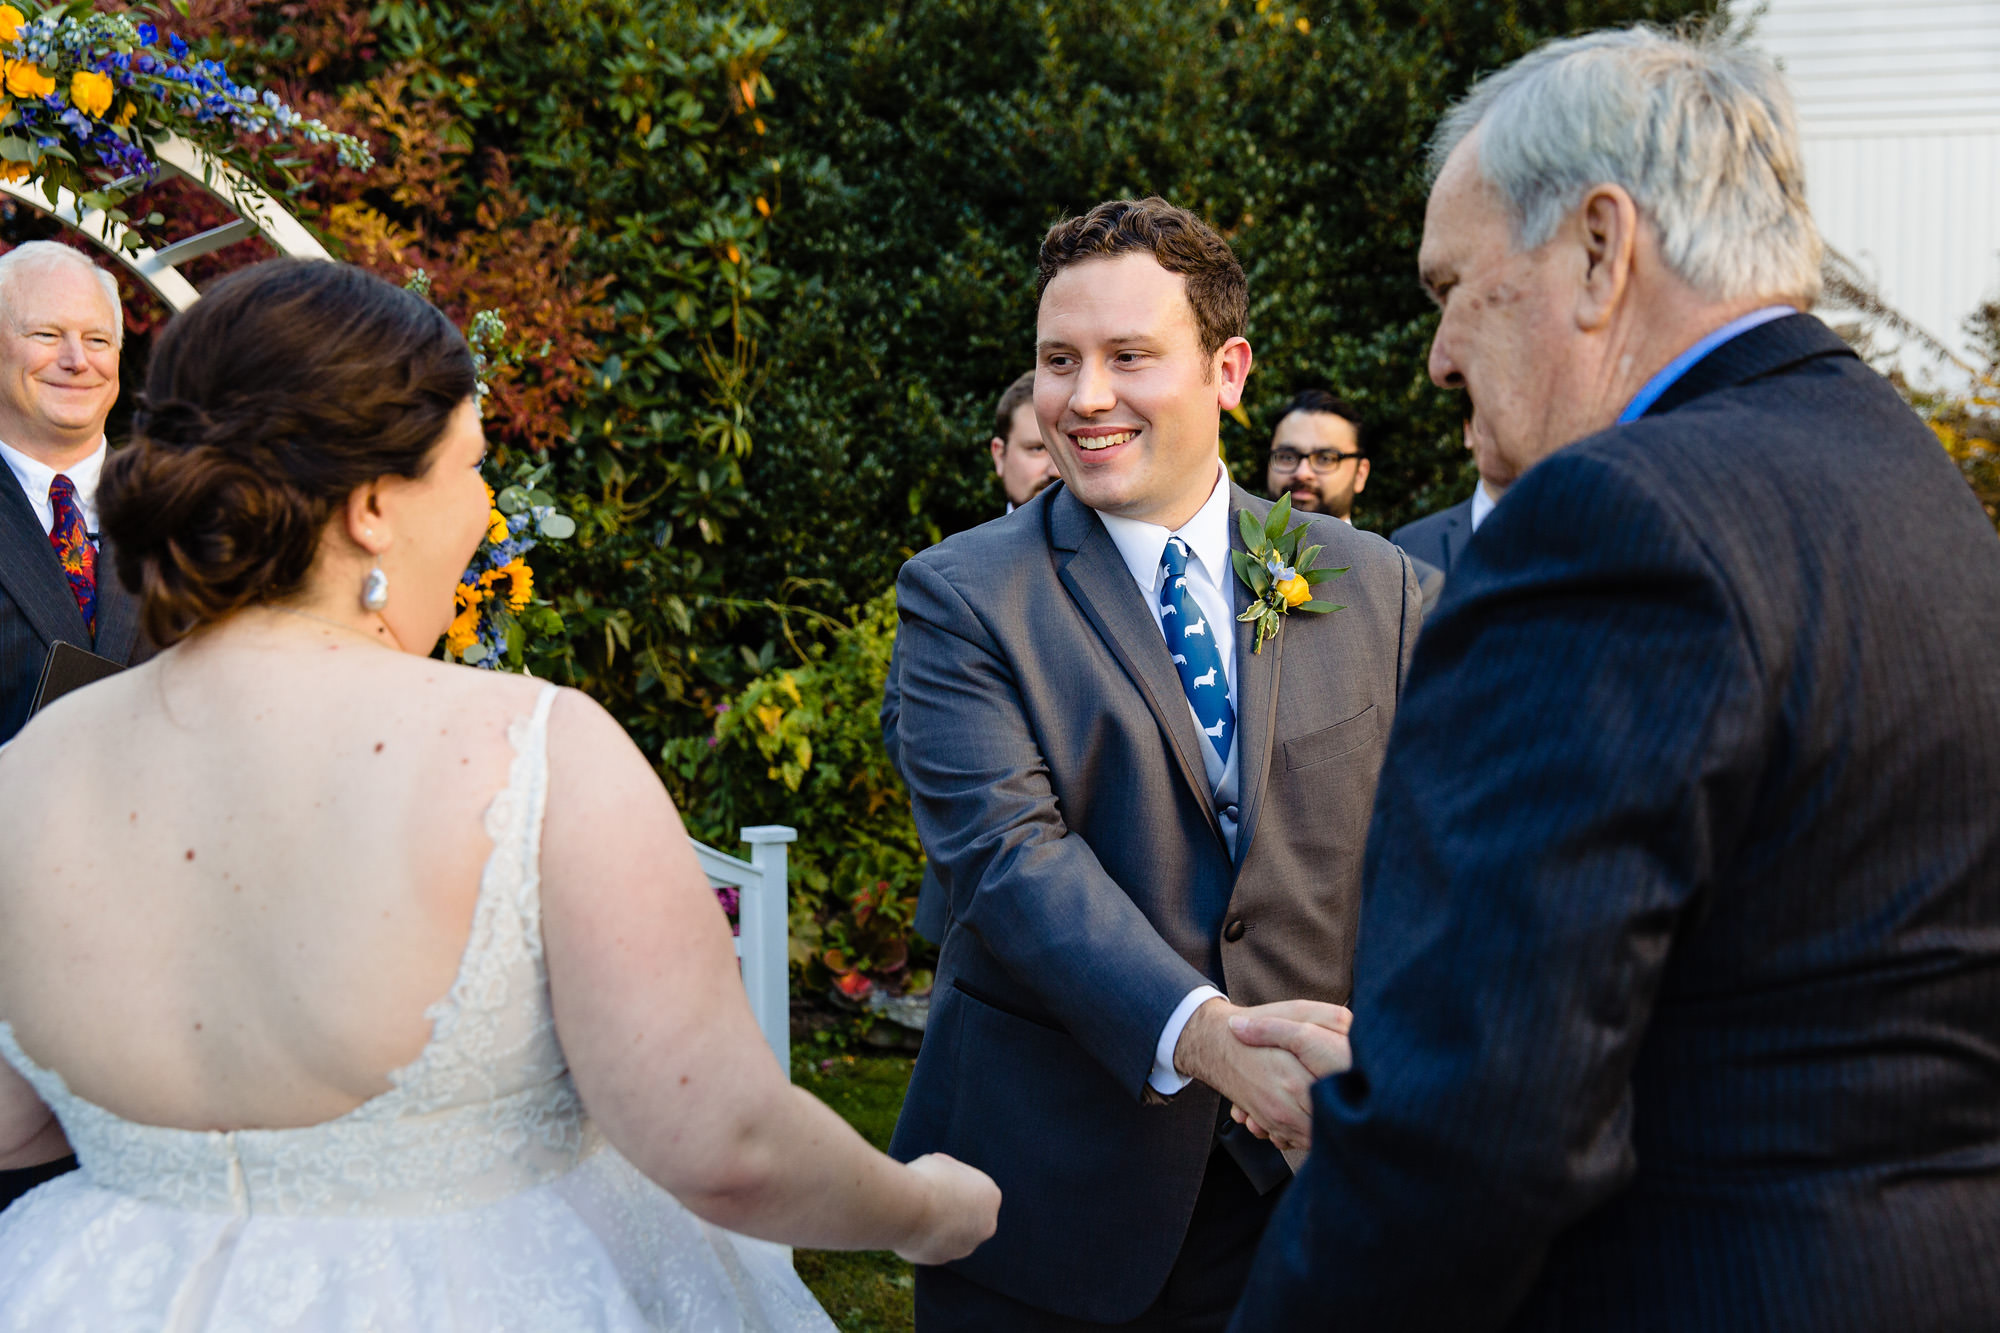 The groom shakes the father of the bride's hand while admiring the bride at their Freeport Maine wedding